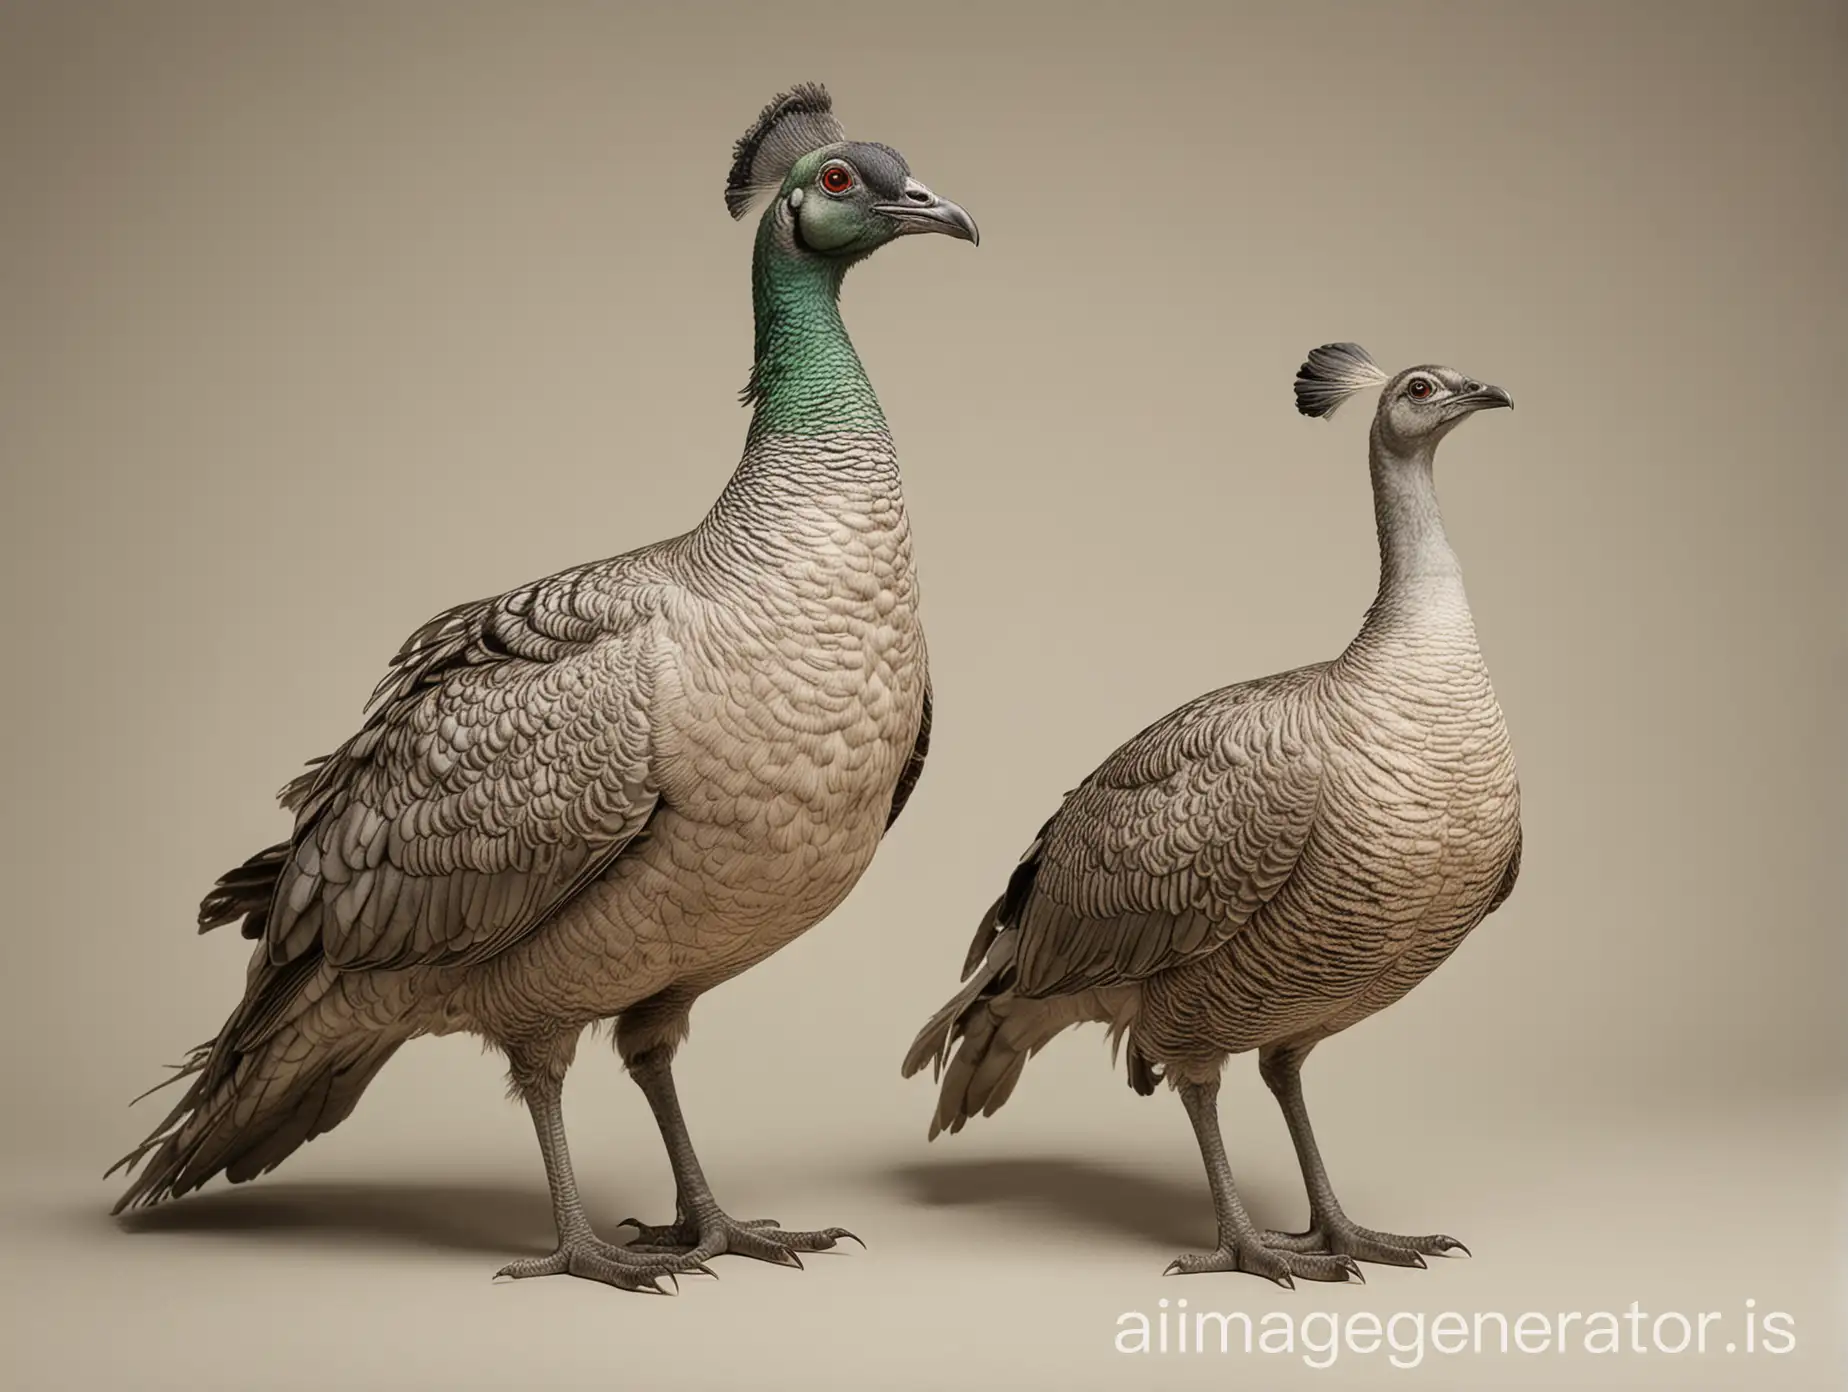 Realistic-Peahen-and-Peacock-Graceful-Avian-Pair-Against-Neutral-Backdrop